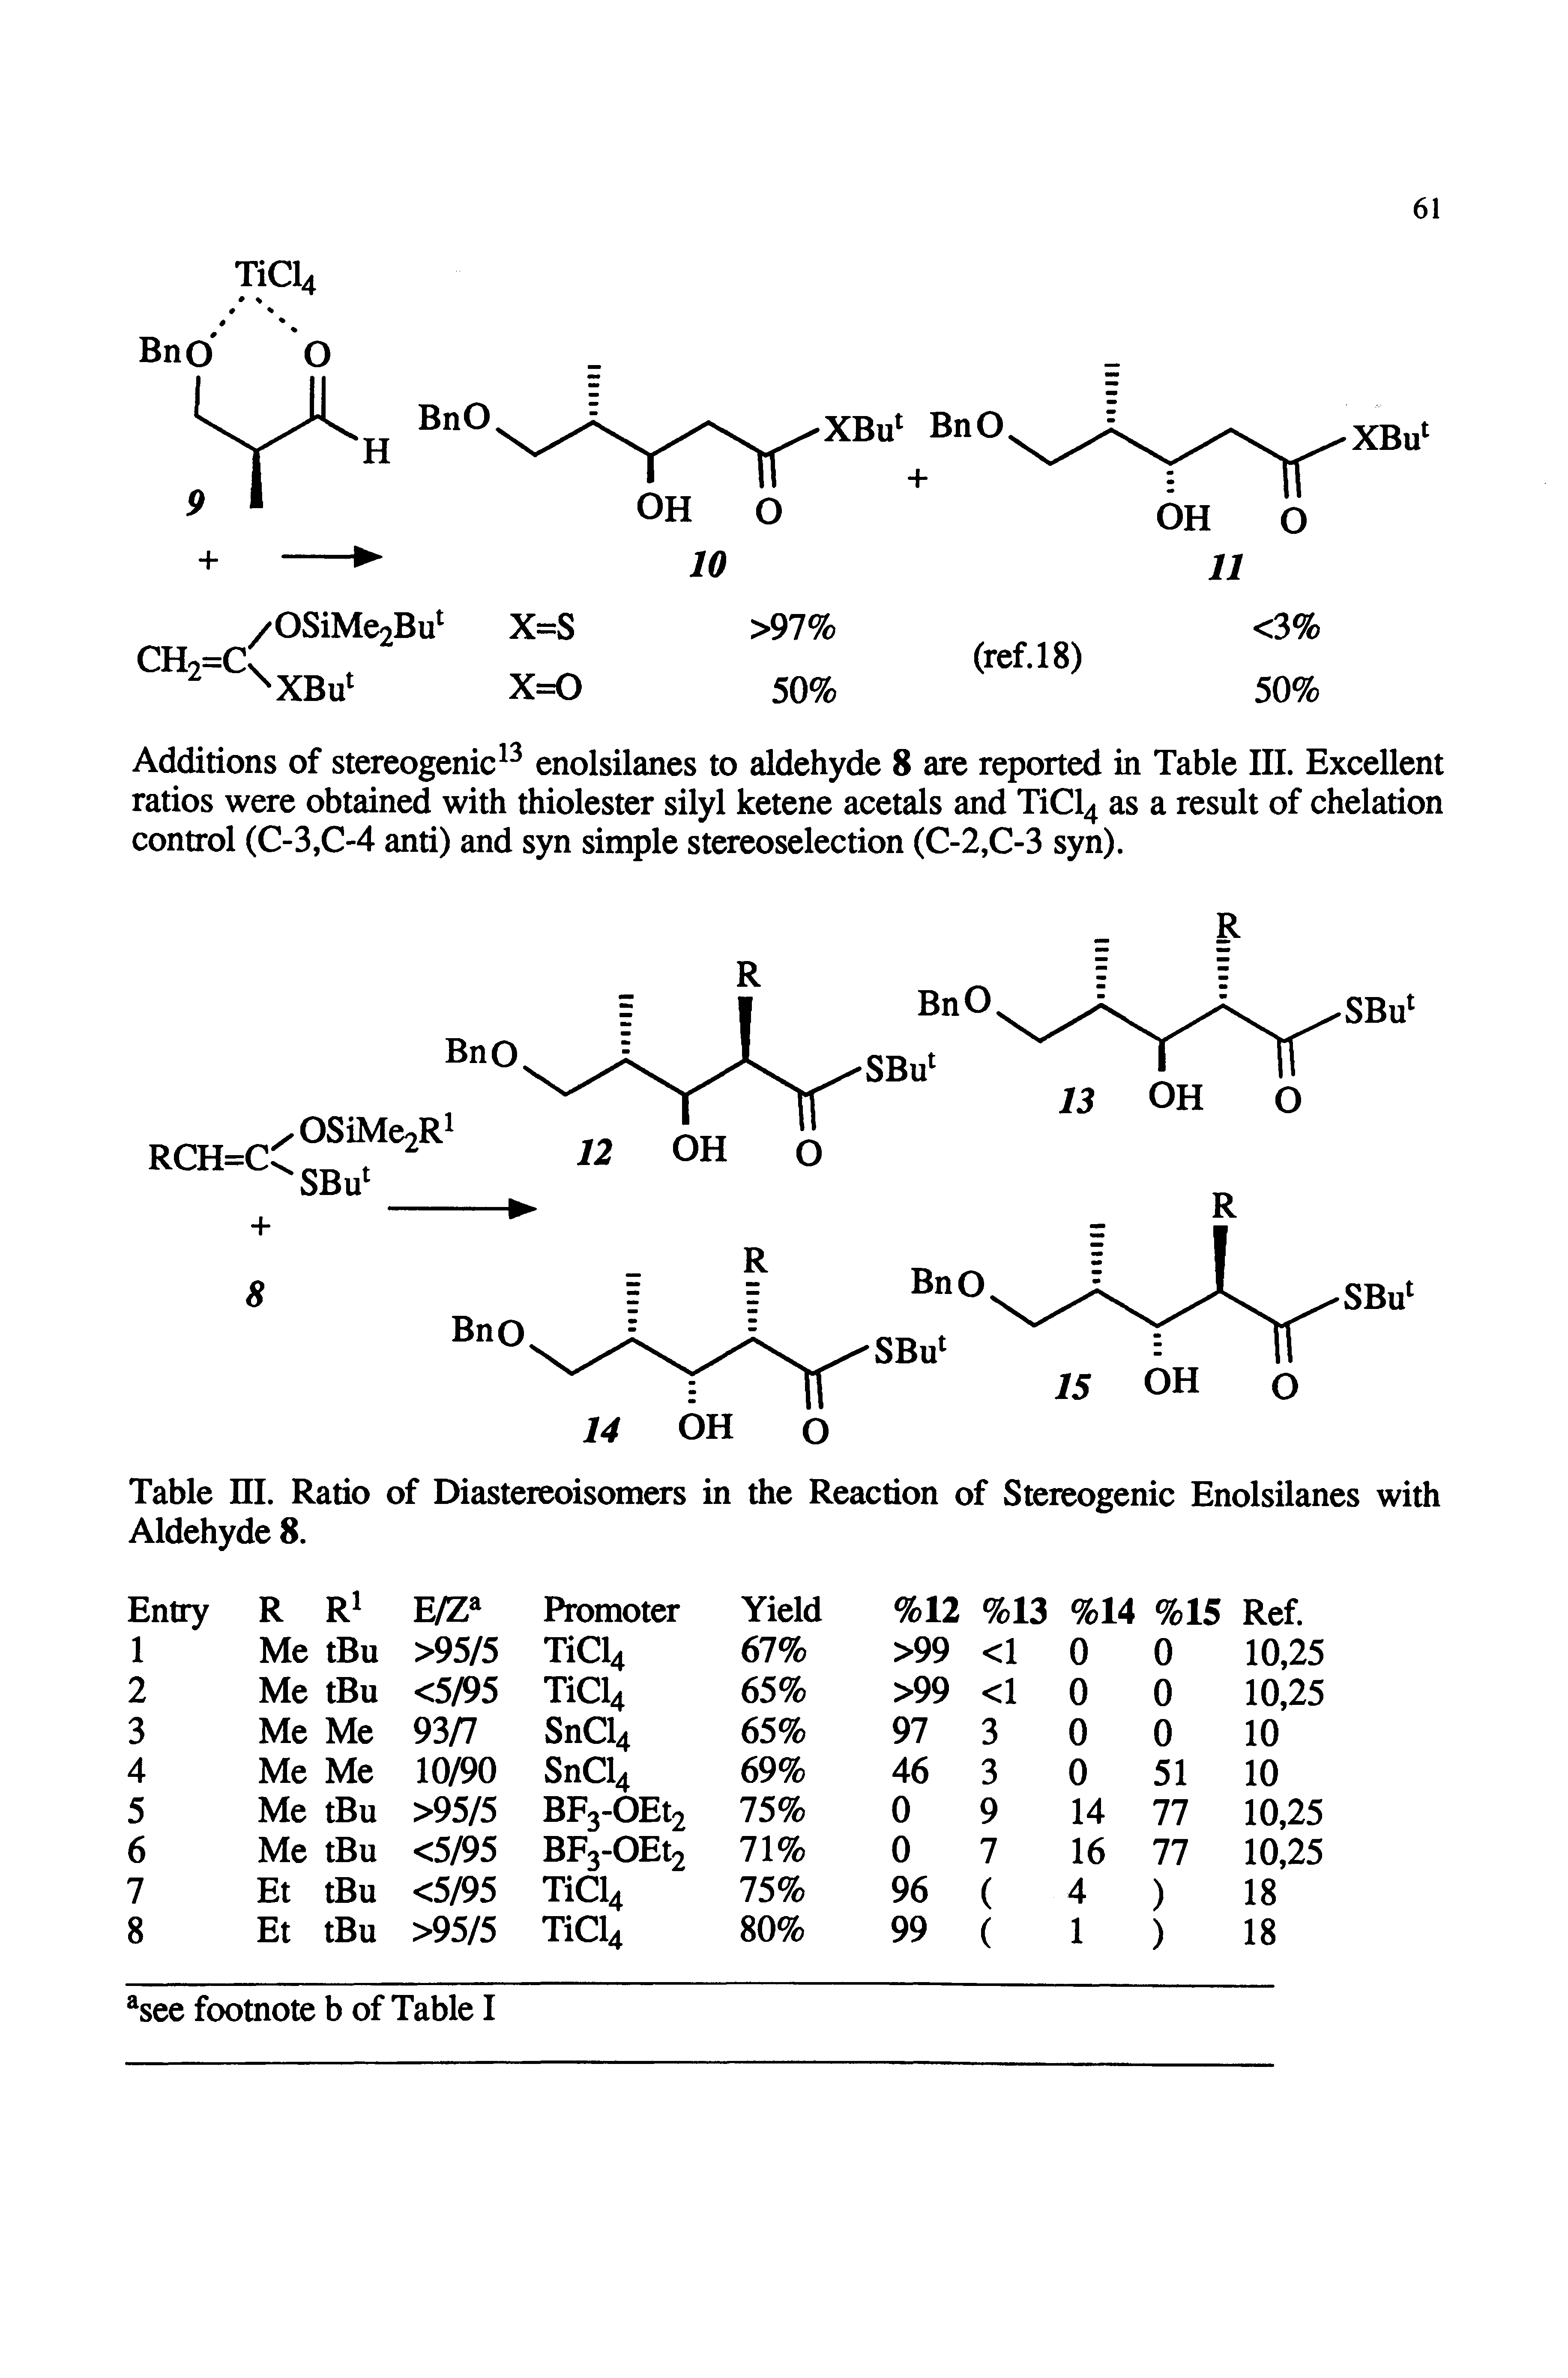 Table III. Ratio of Diasteieoisomers in the Reaction of Stereogenic Enolsilanes with Aldehyde 8.